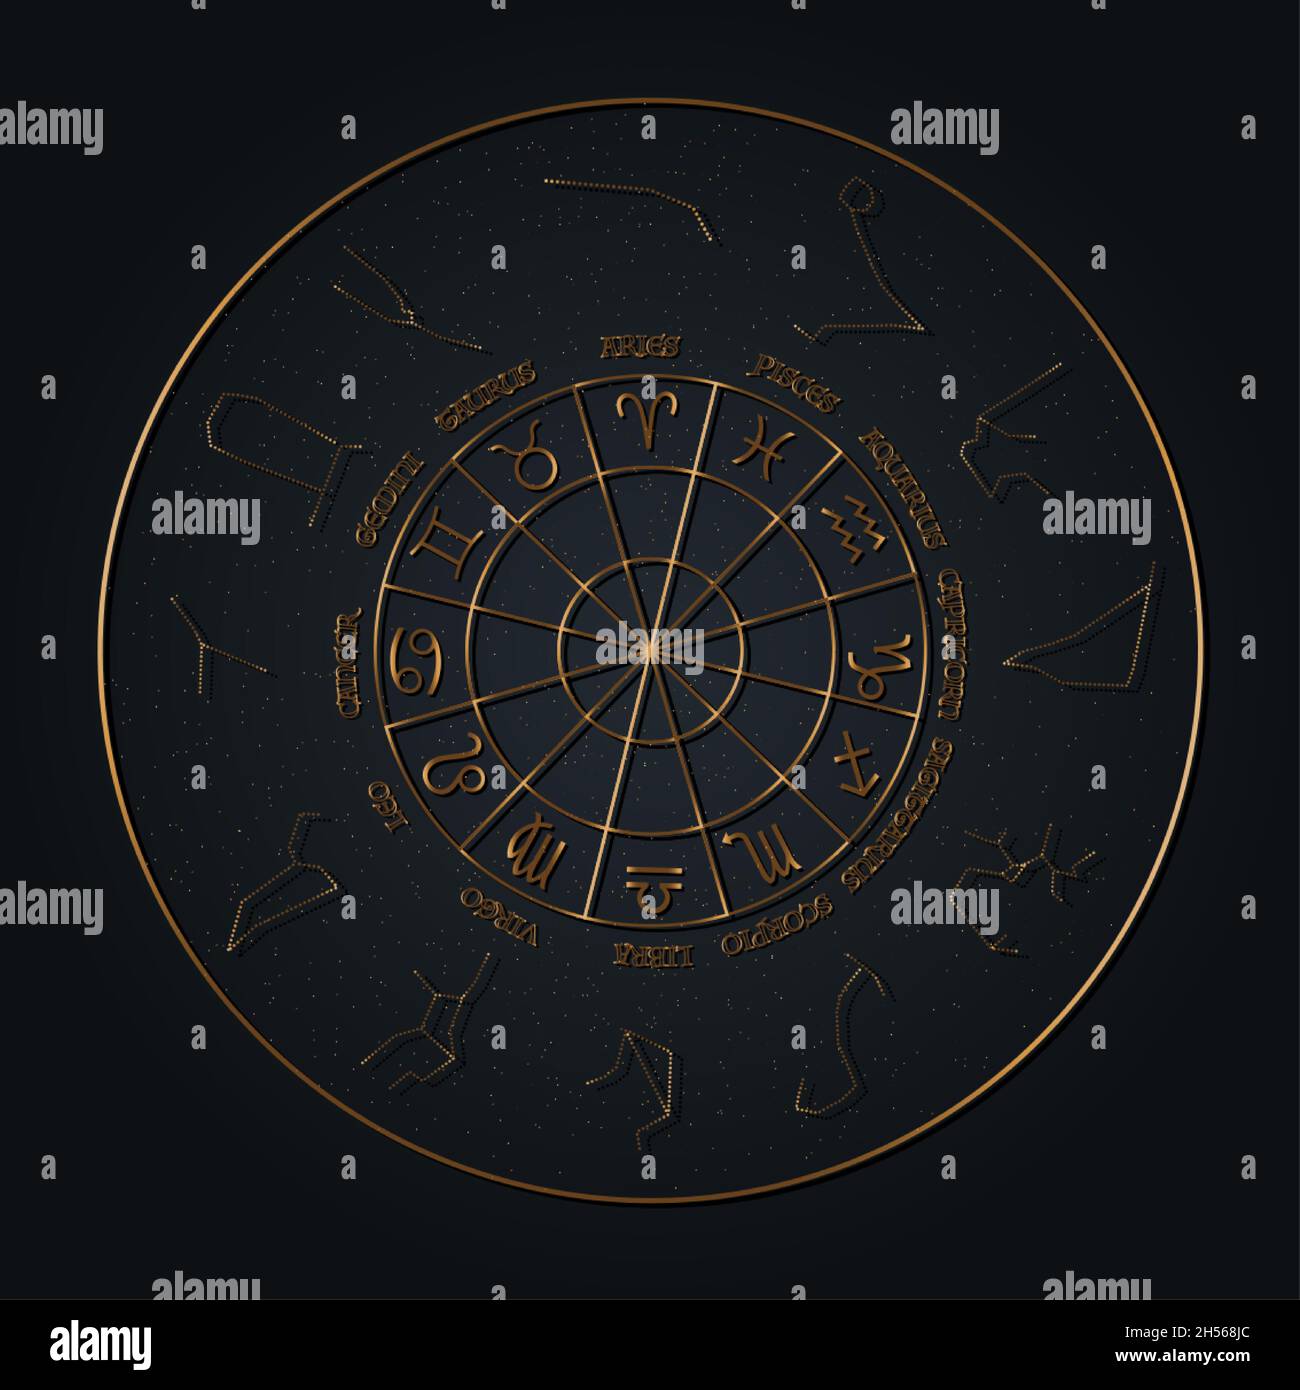 Zodiac wheel of constellations and sign set, vector illustration. Astrological symbols with golden gradient effect. stars on night sky map background. Stock Vector